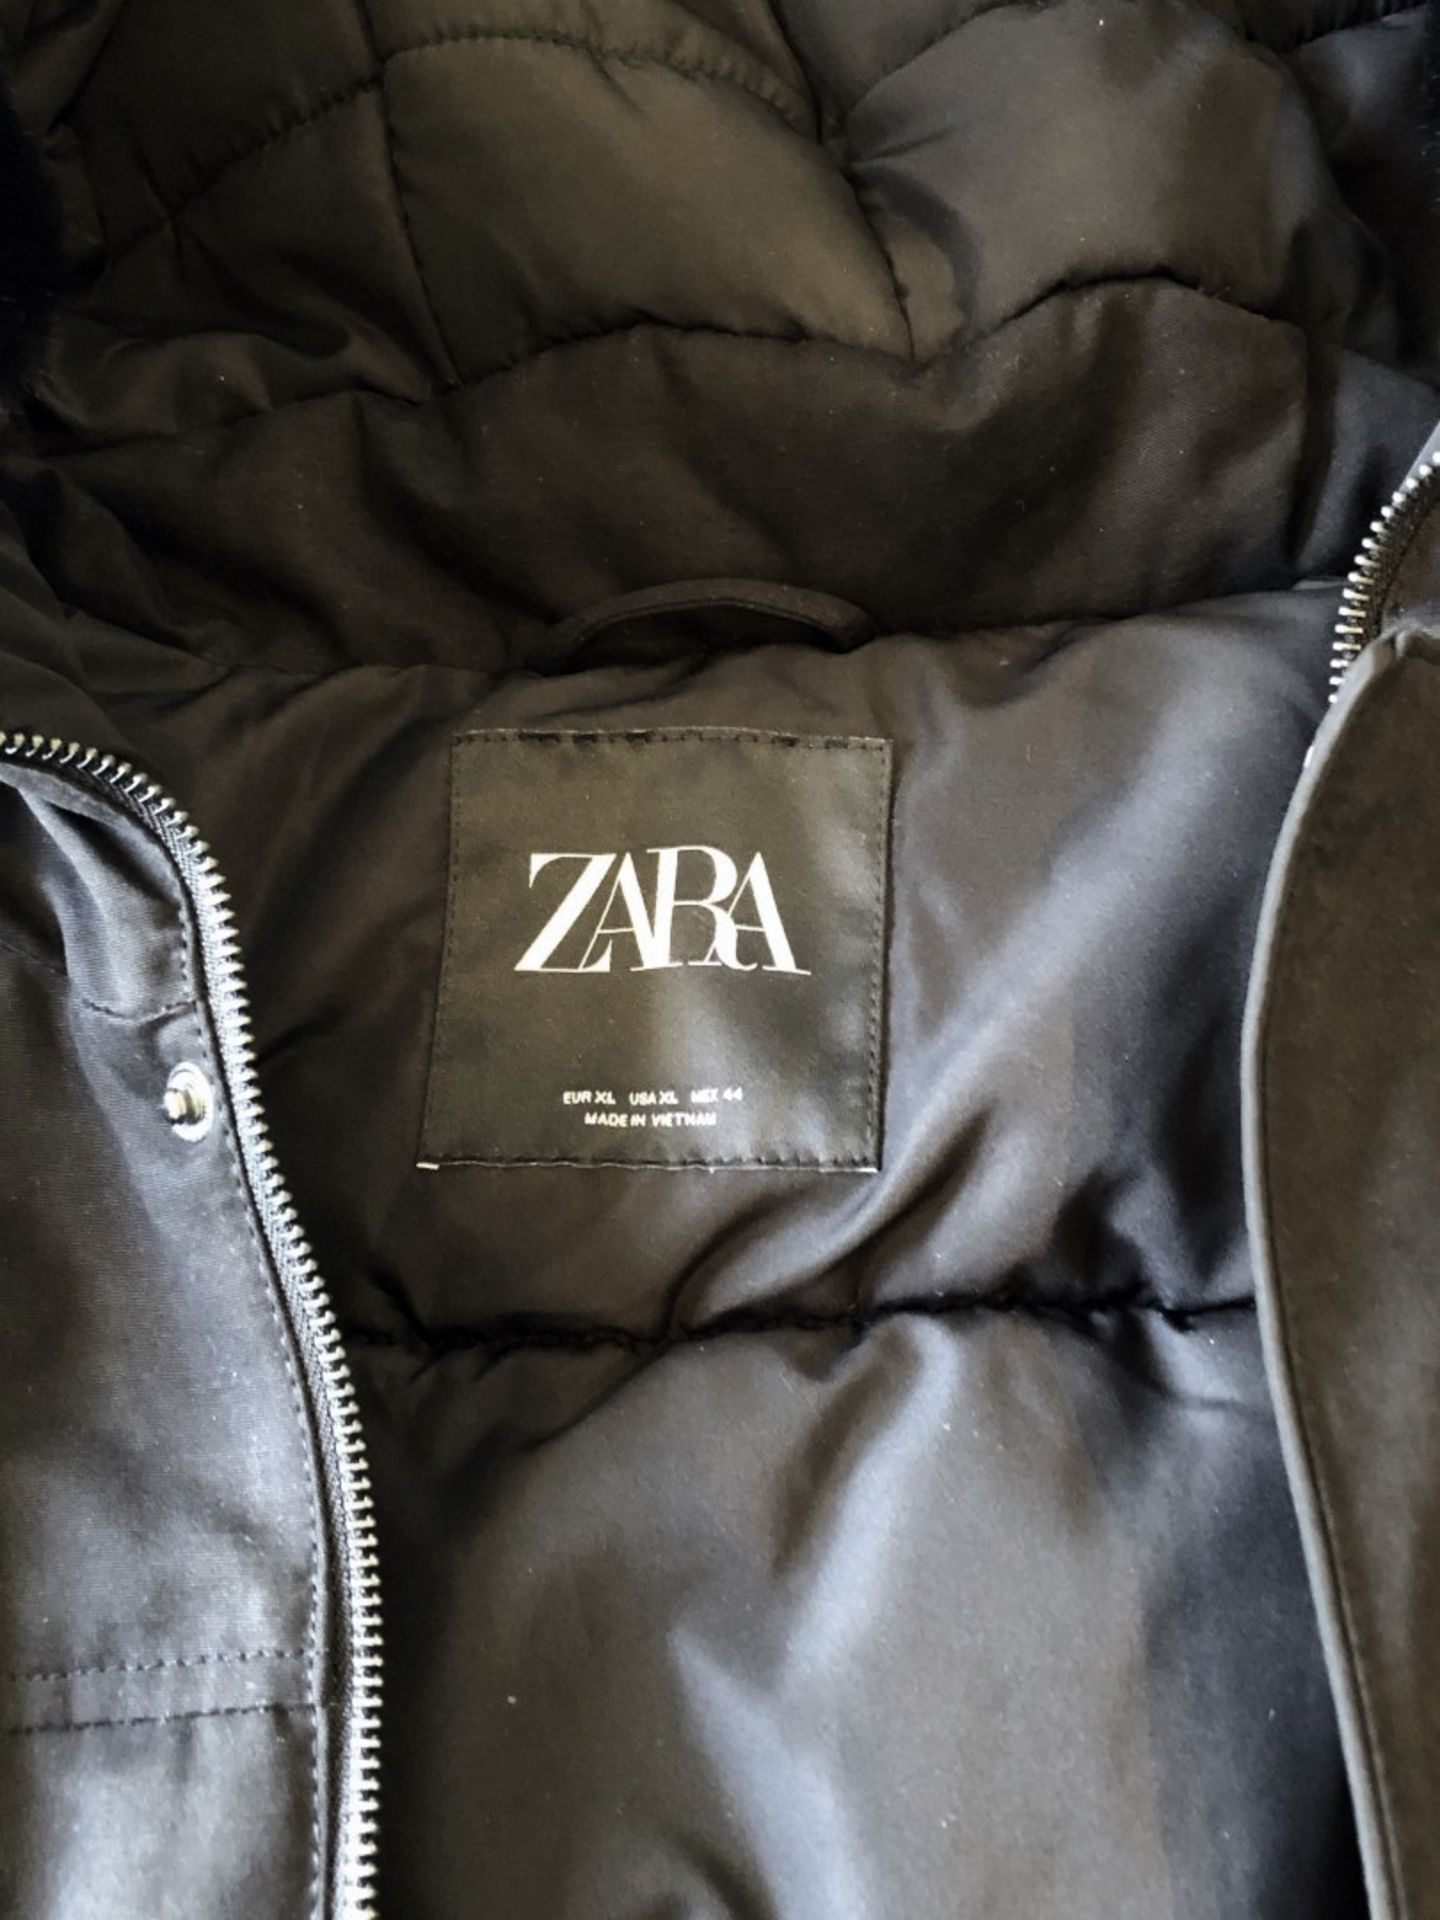 1 x Men's Genuine Zara Coat In Black With A Faux Fur Lined Hood - Size (EU/UK): XL/XL - Preowned - - Image 5 of 8